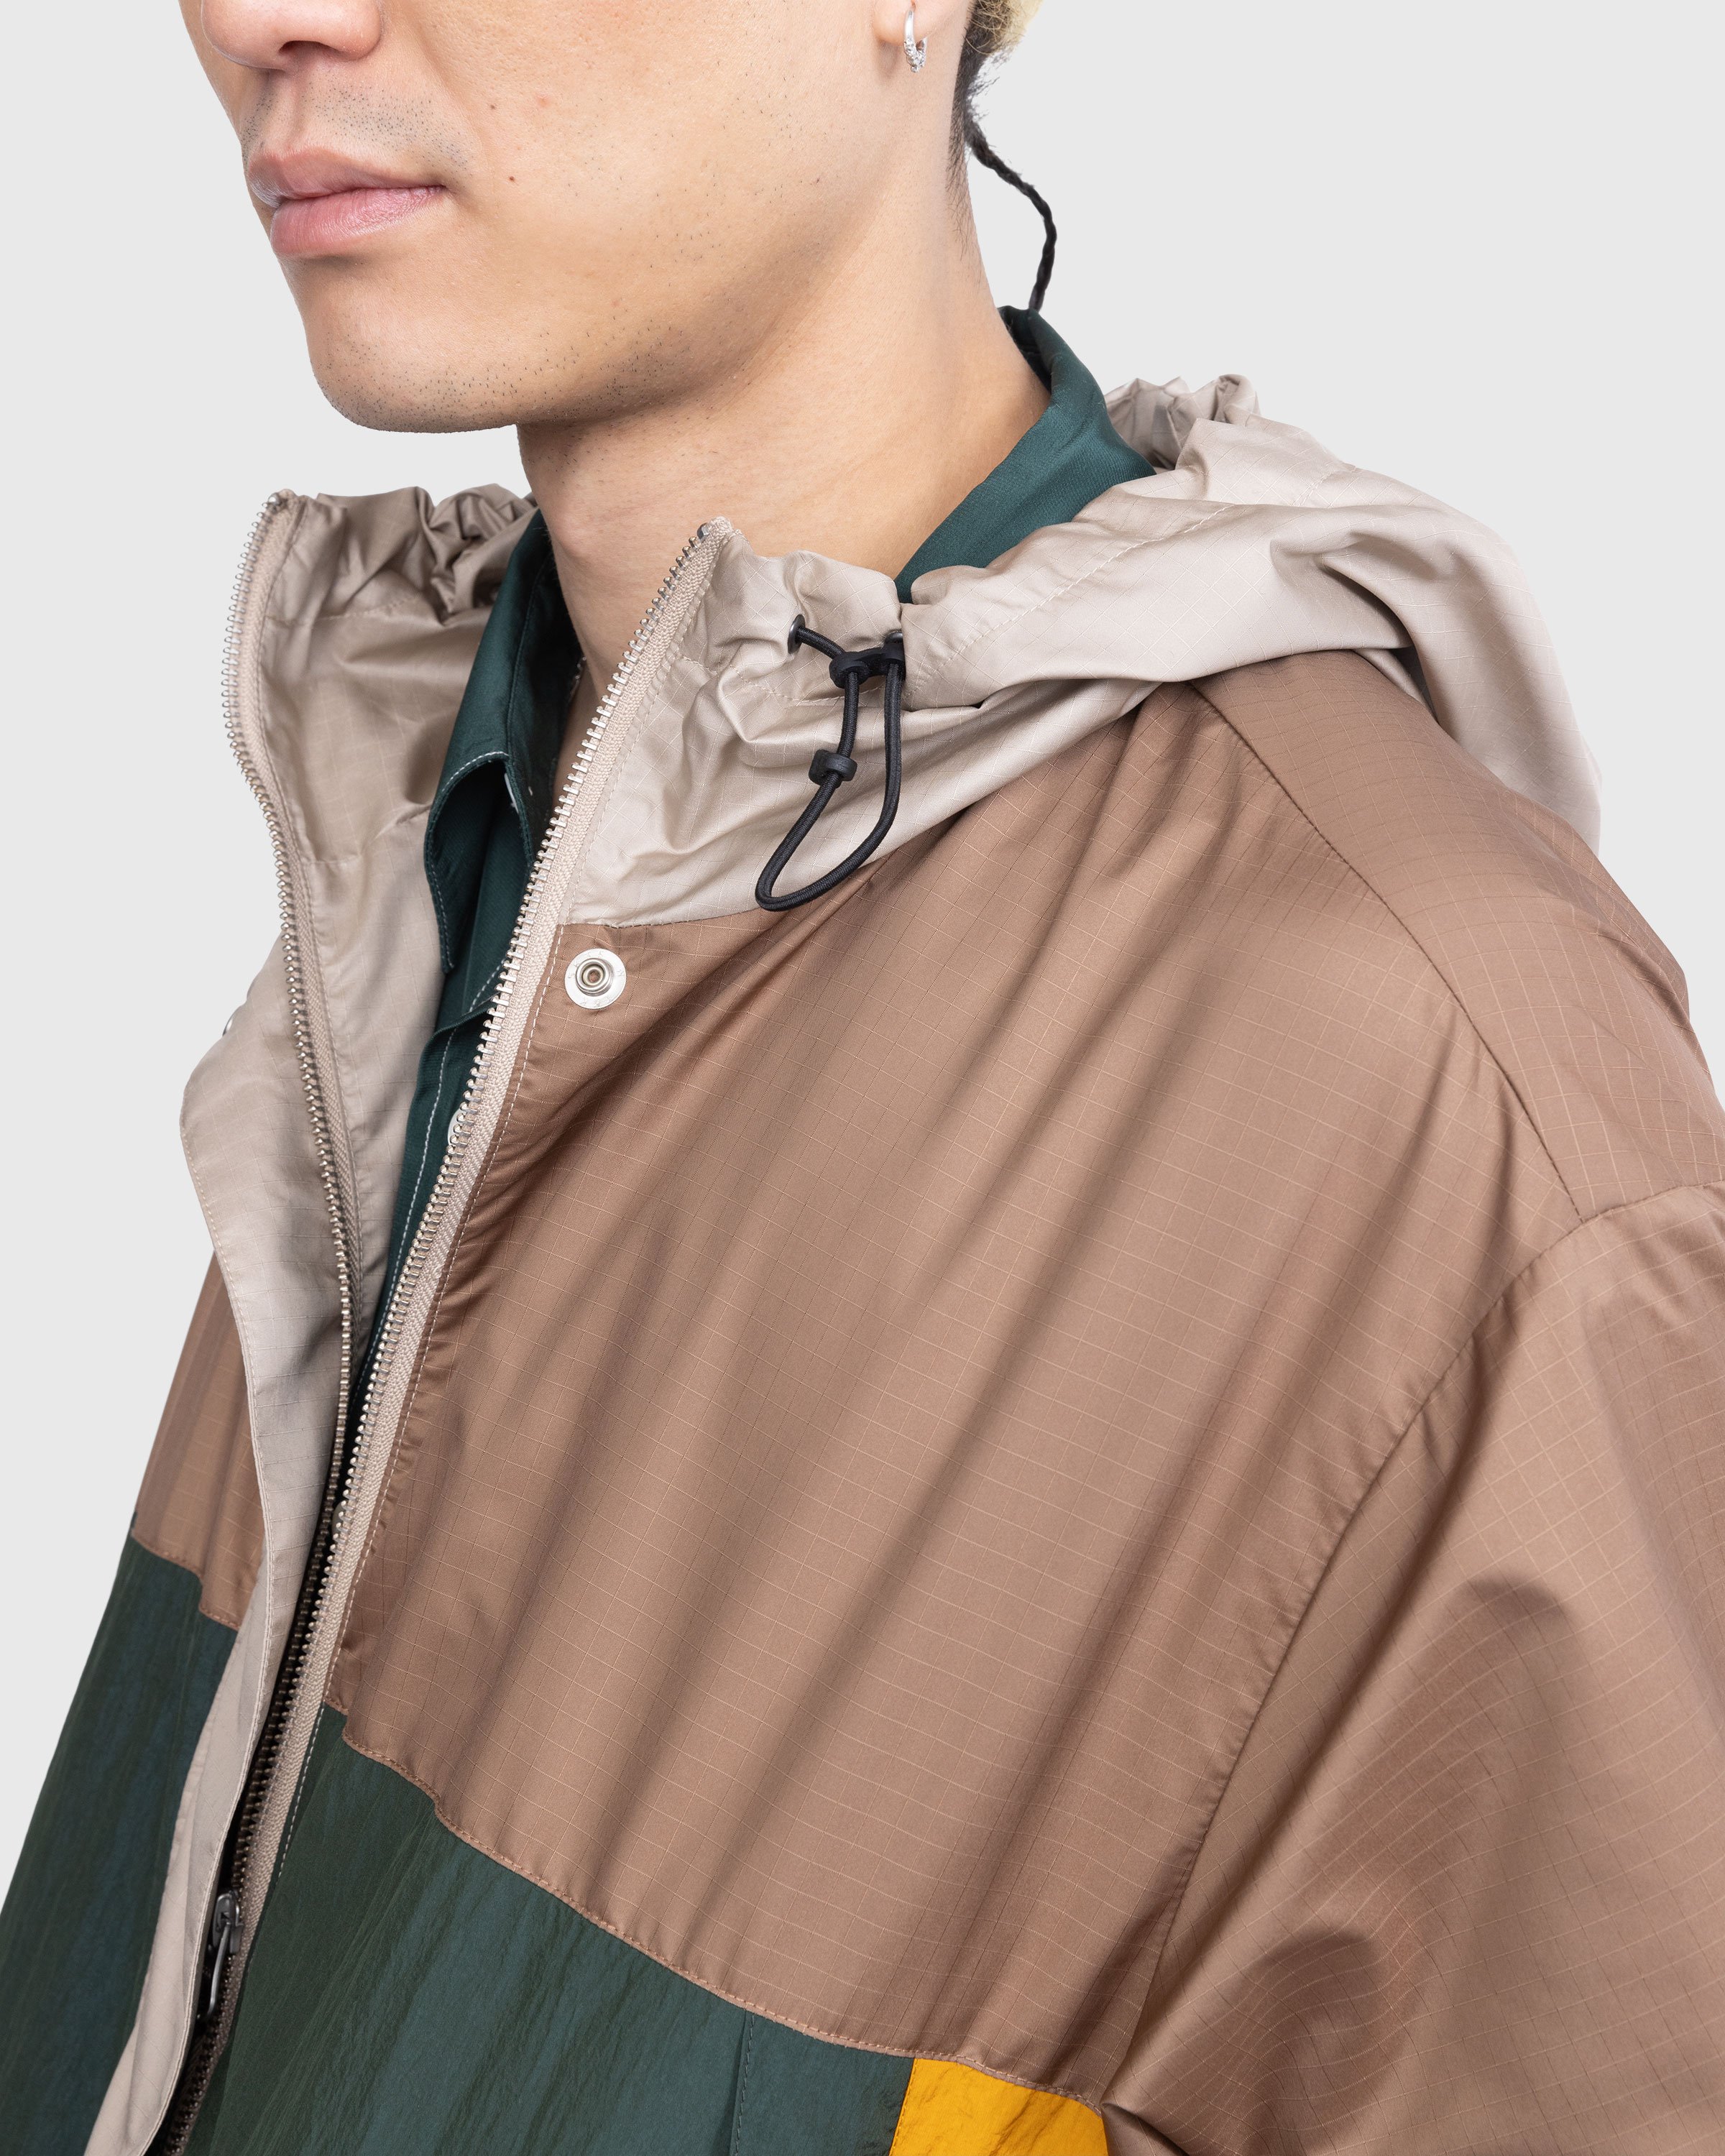 Highsnobiety - Mix Panel Parka Brown/Green - Clothing - Multi - Image 5